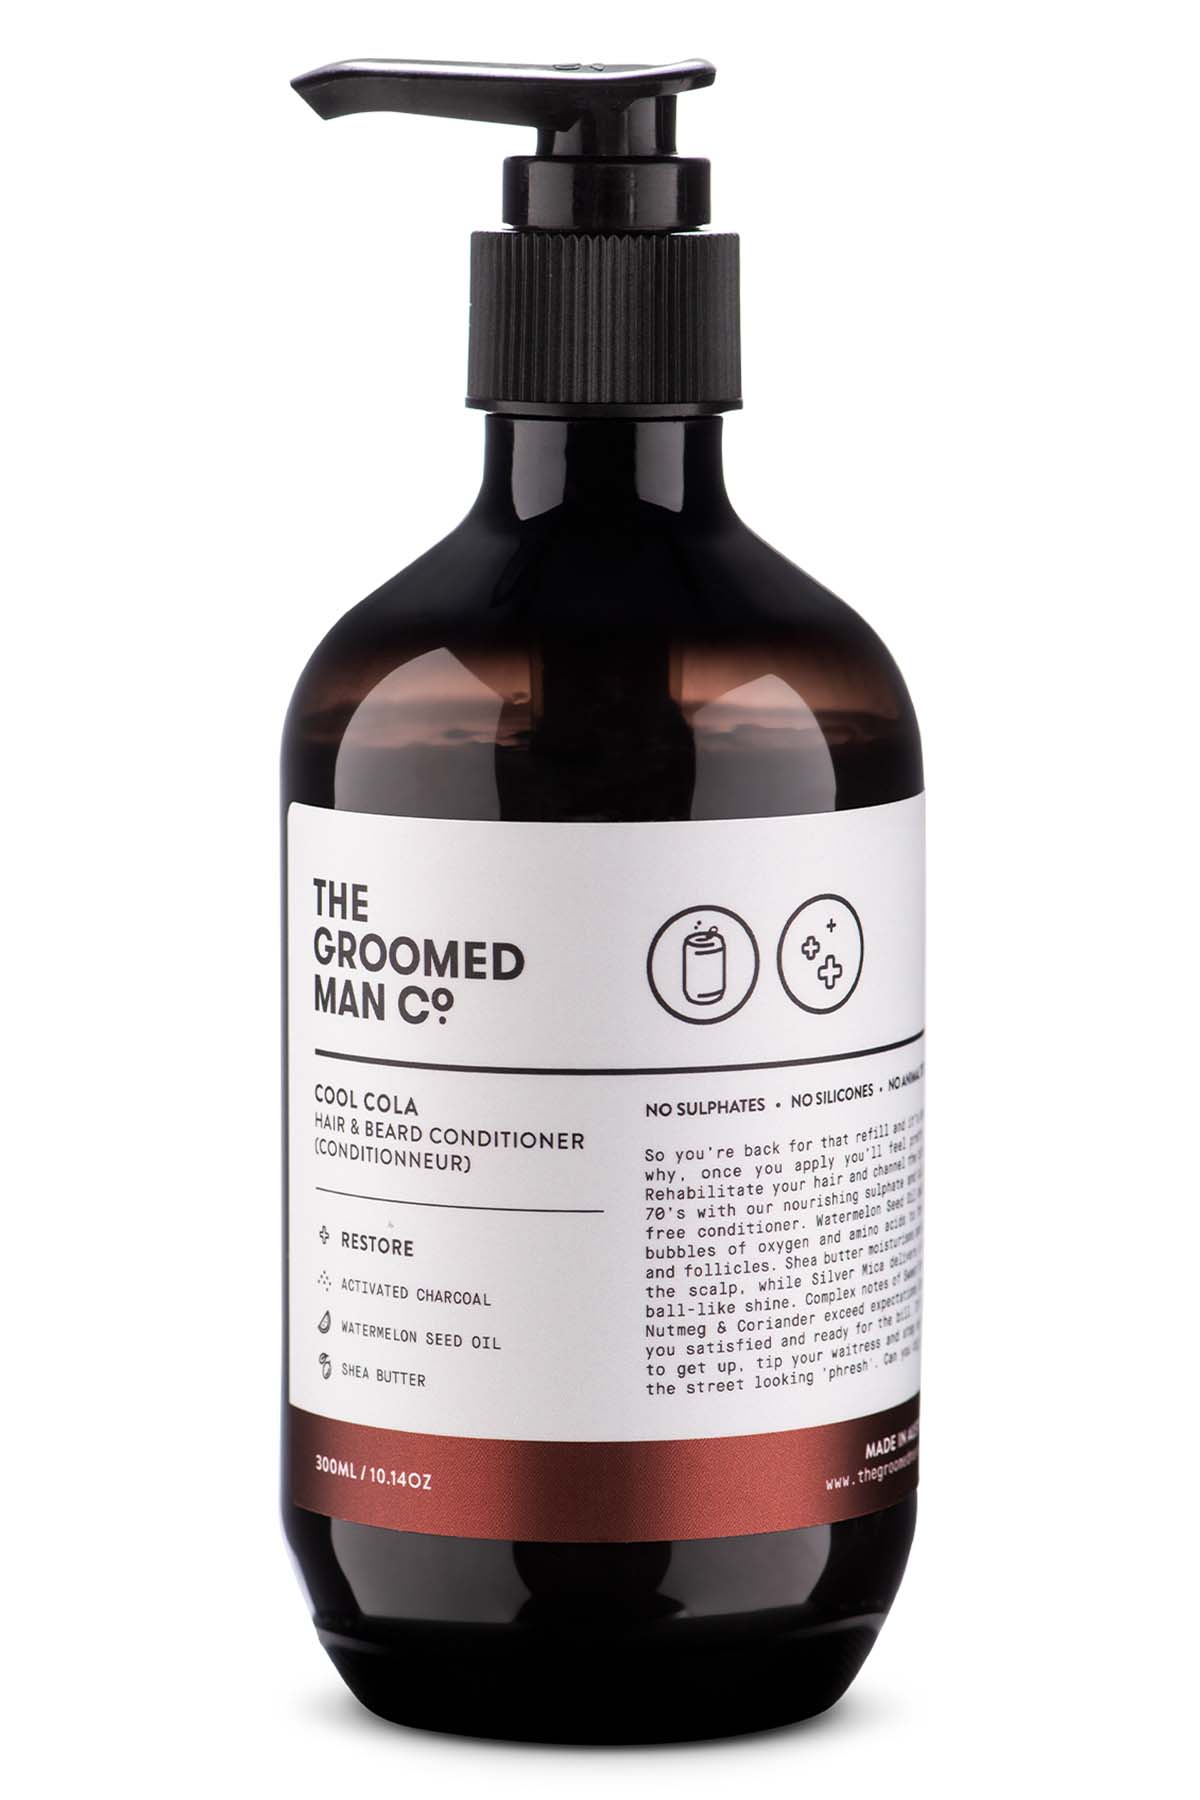 The Groomed Man Co. Cool Cola Premium Hair & Beard Conditioner